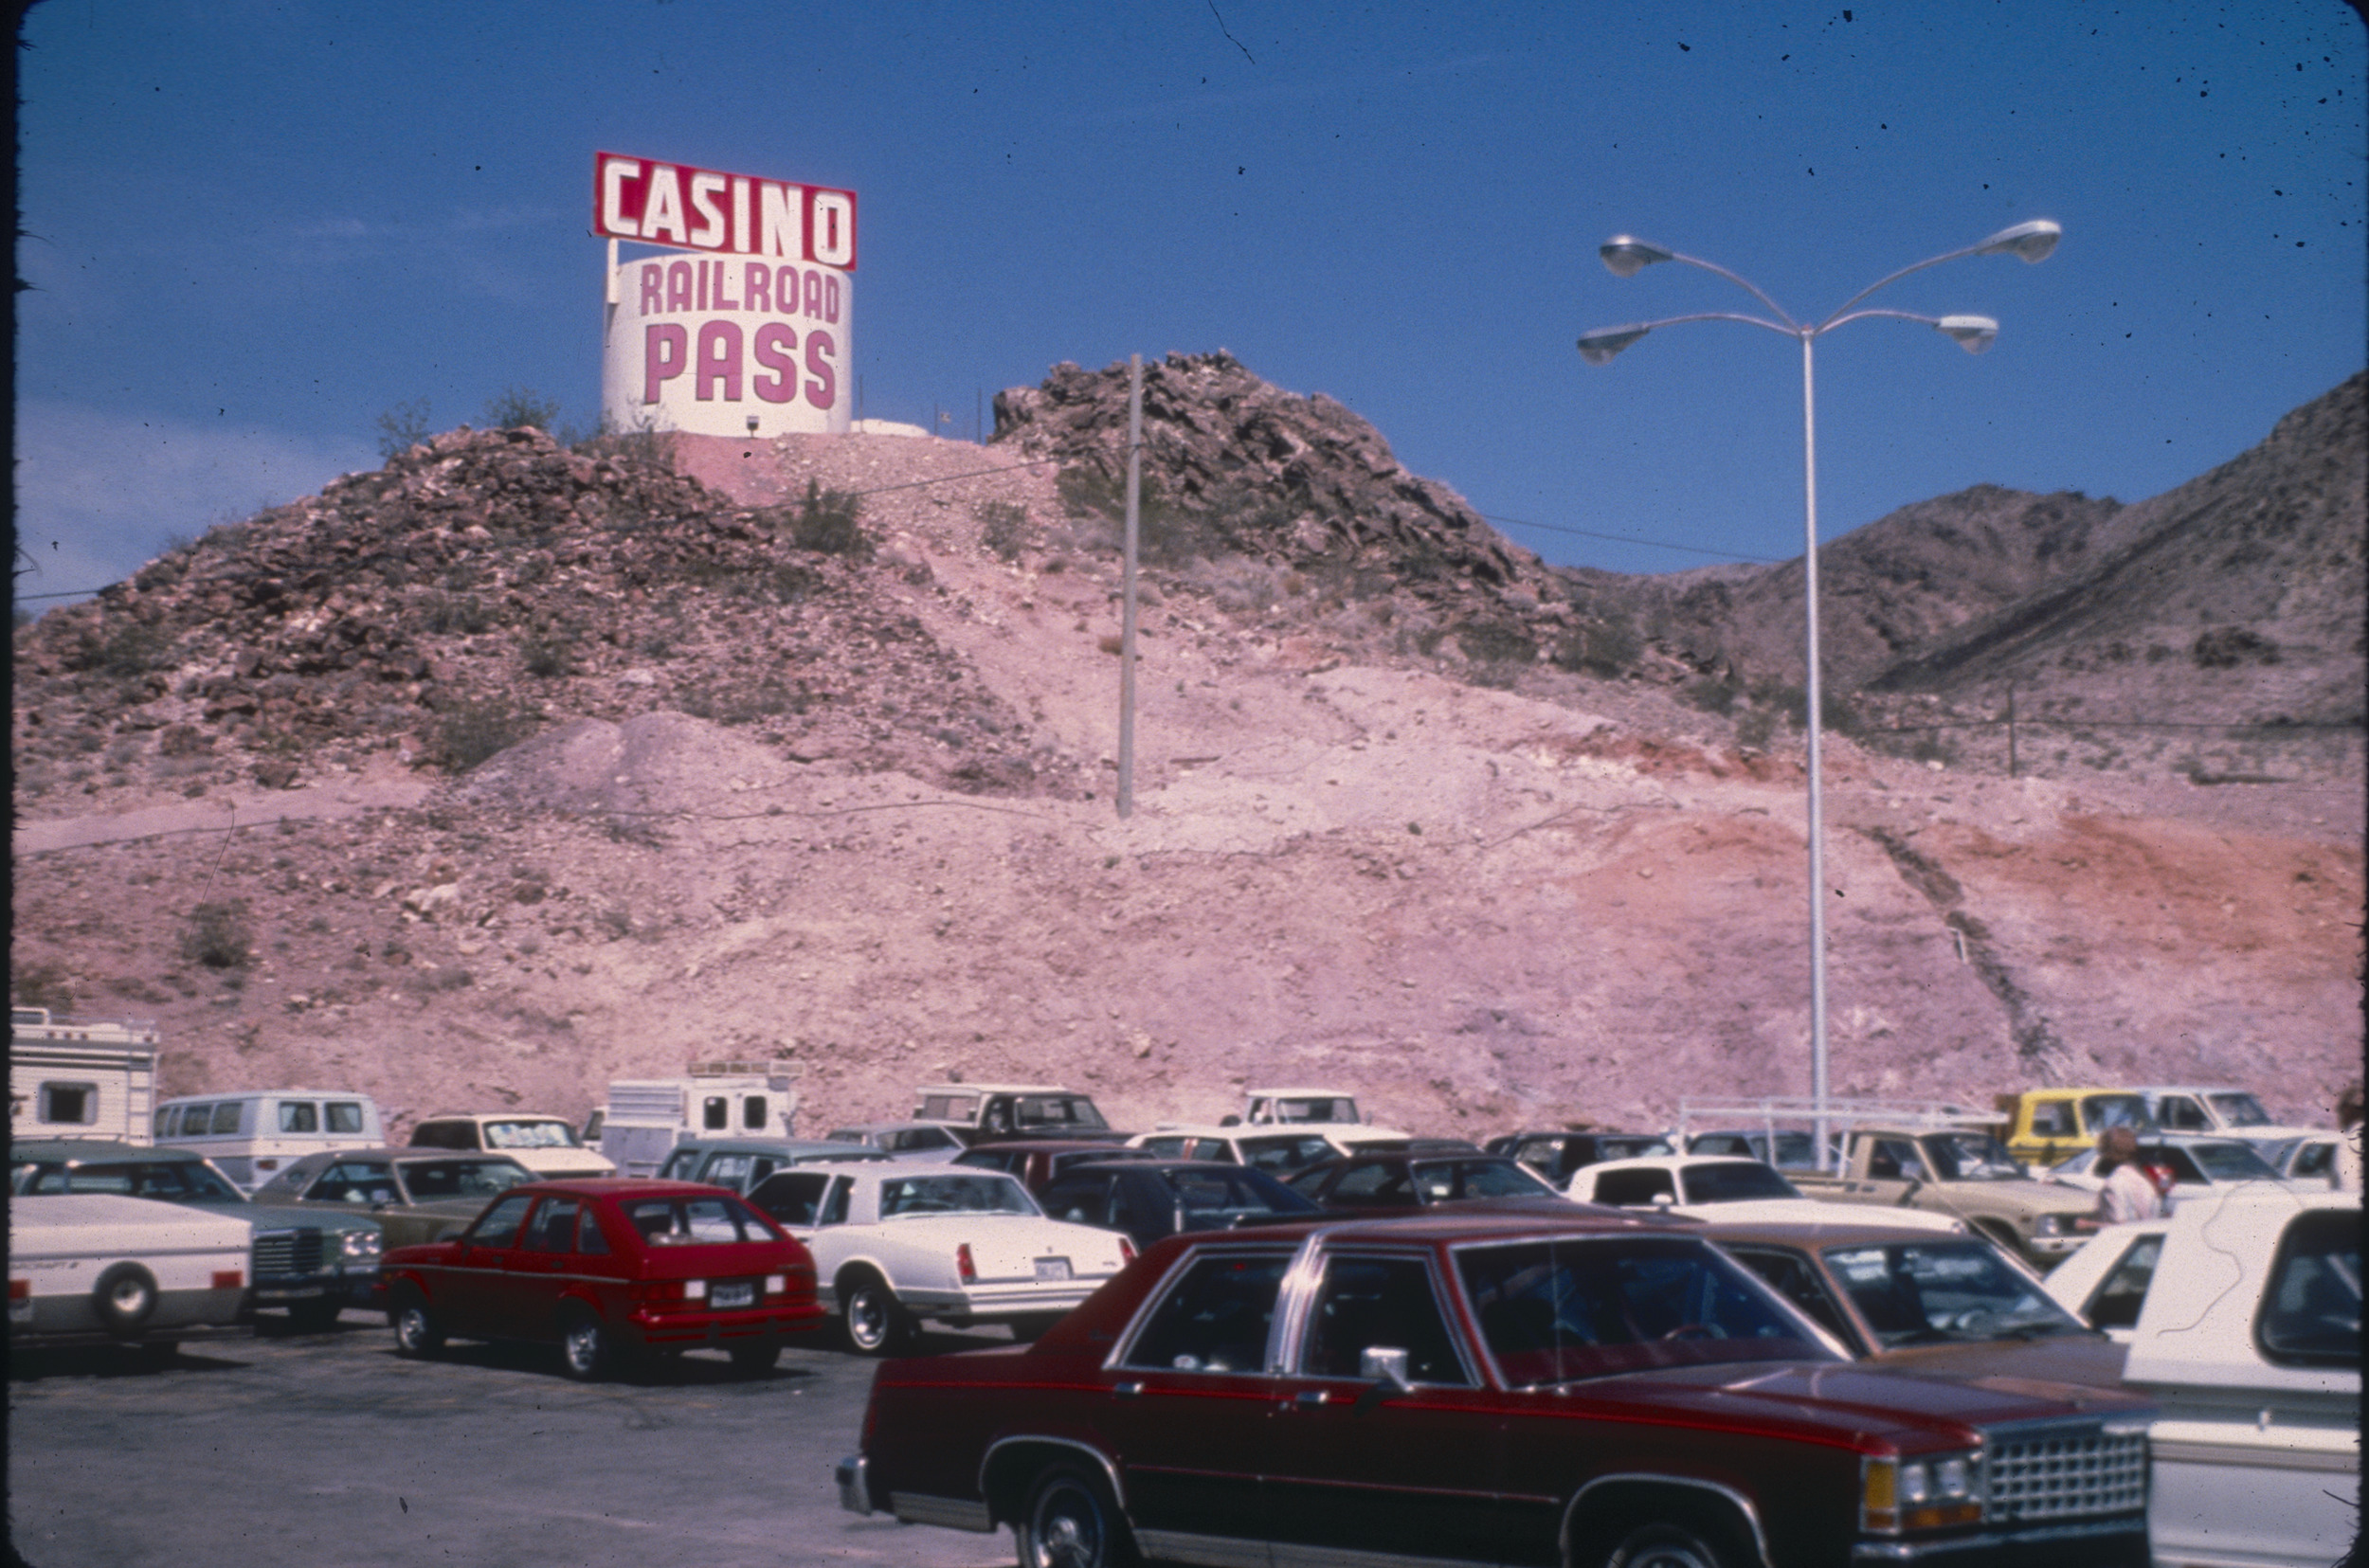 Slide of the neon sign for the Railroad Pass Casino, Henderson, Nevada, 1986